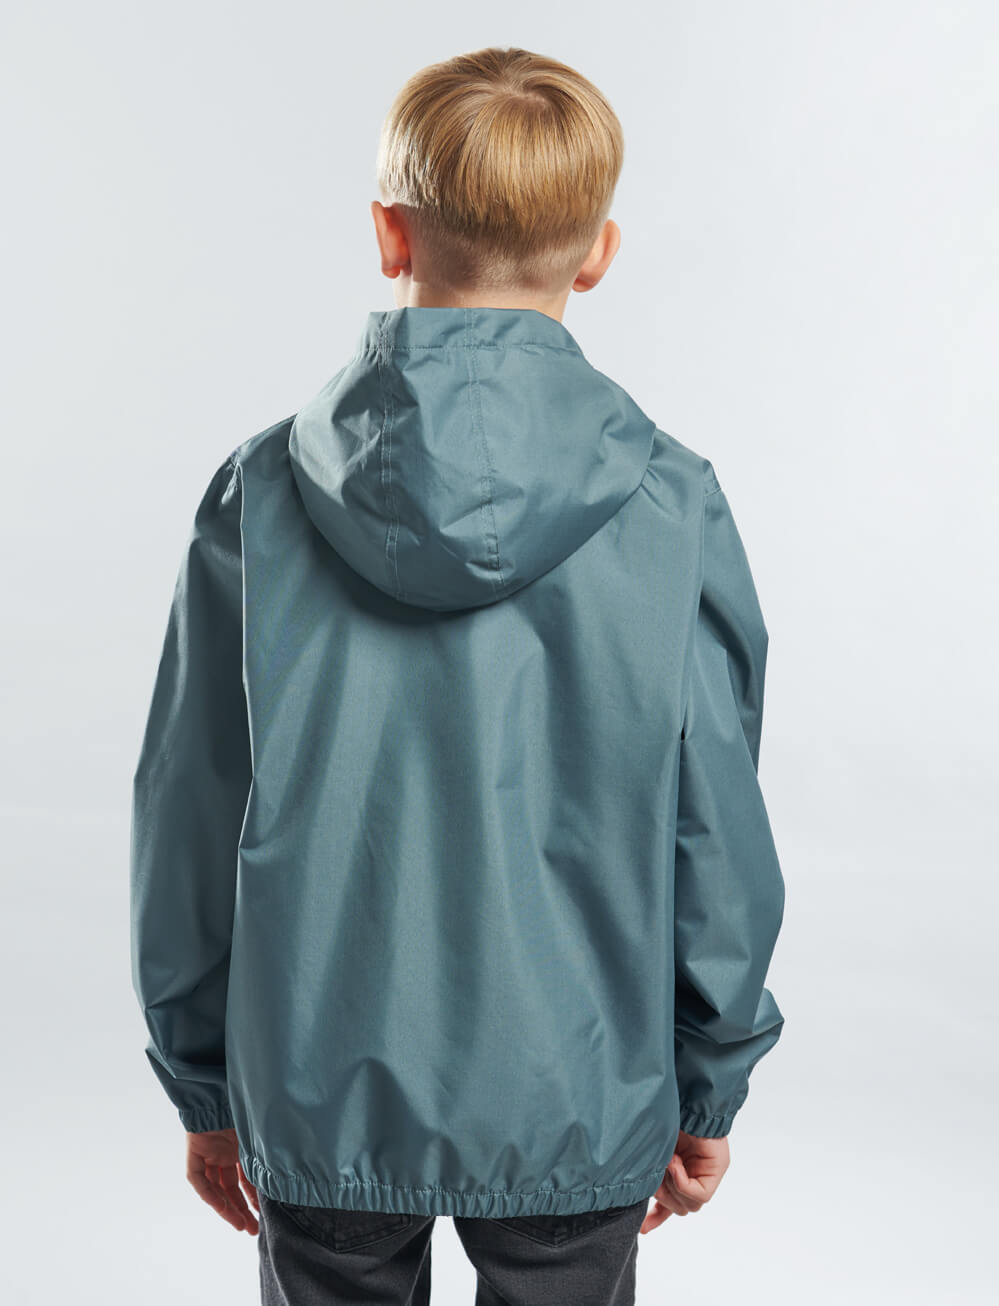 Official Tottenham Kids Shower Jacket - Stormy Weather - The World Football Store